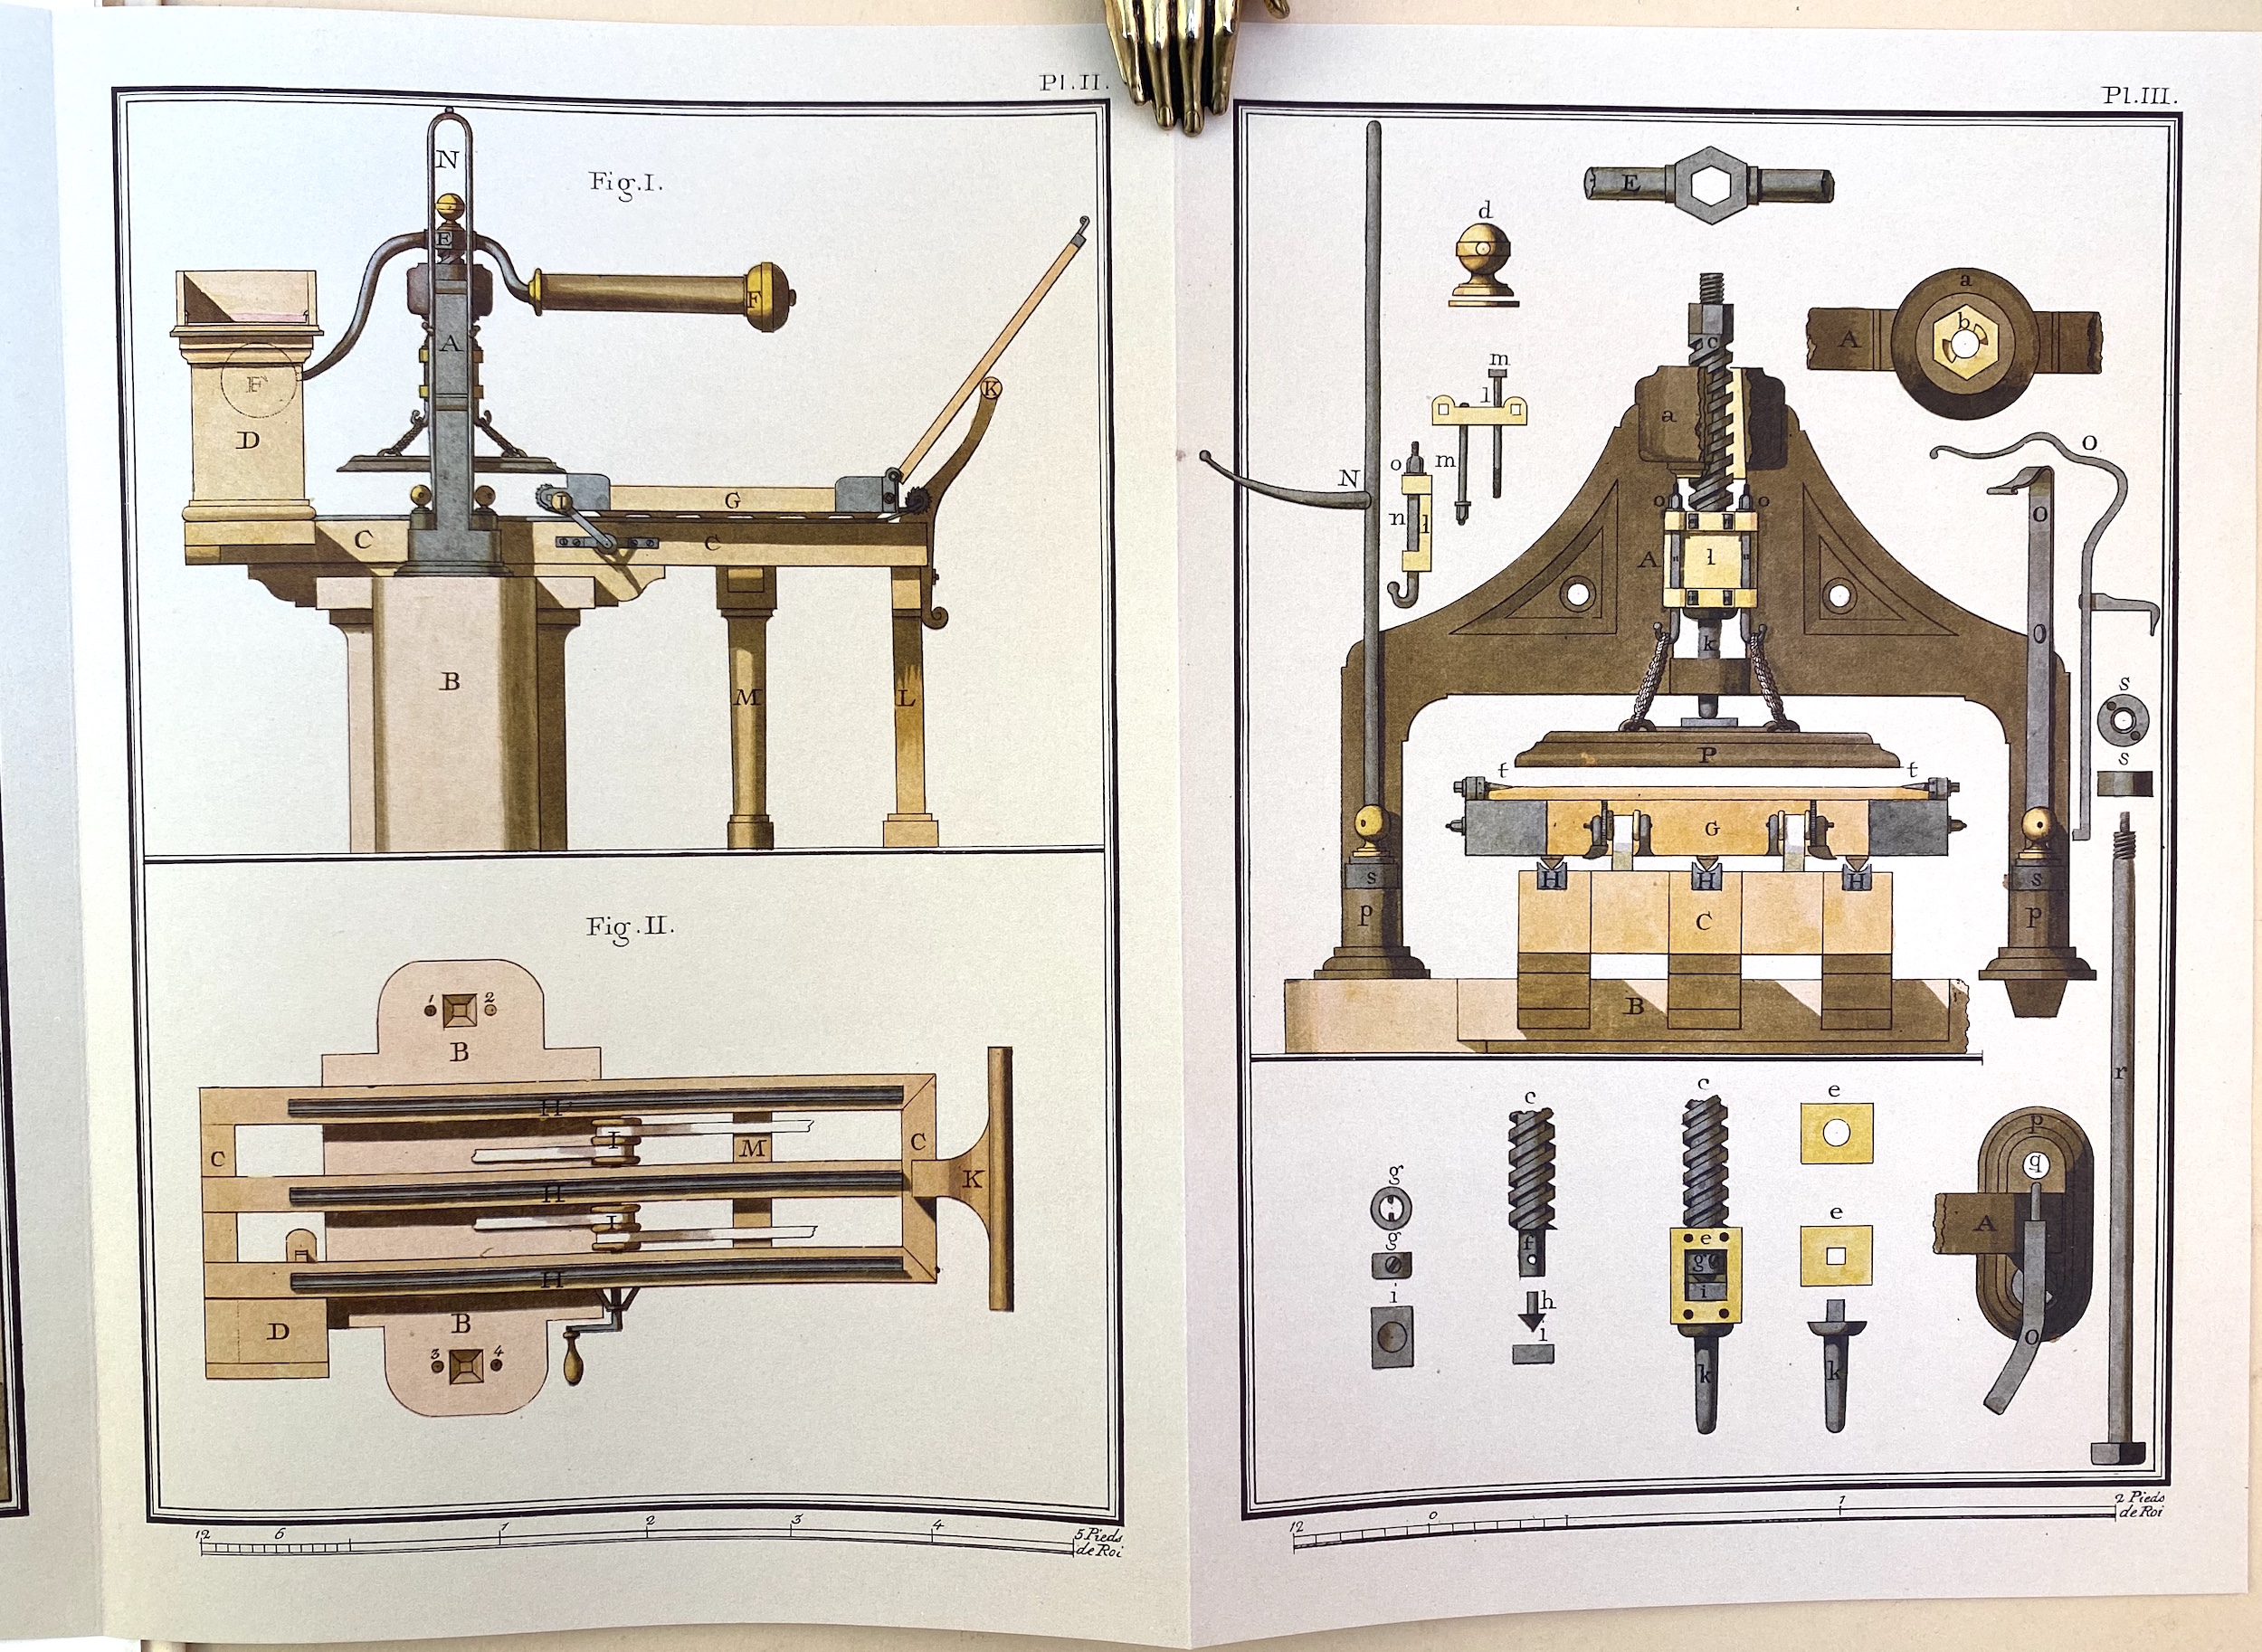 Schematics of the Haas press from the 1955 reproduction of the 1790 pamphlet.